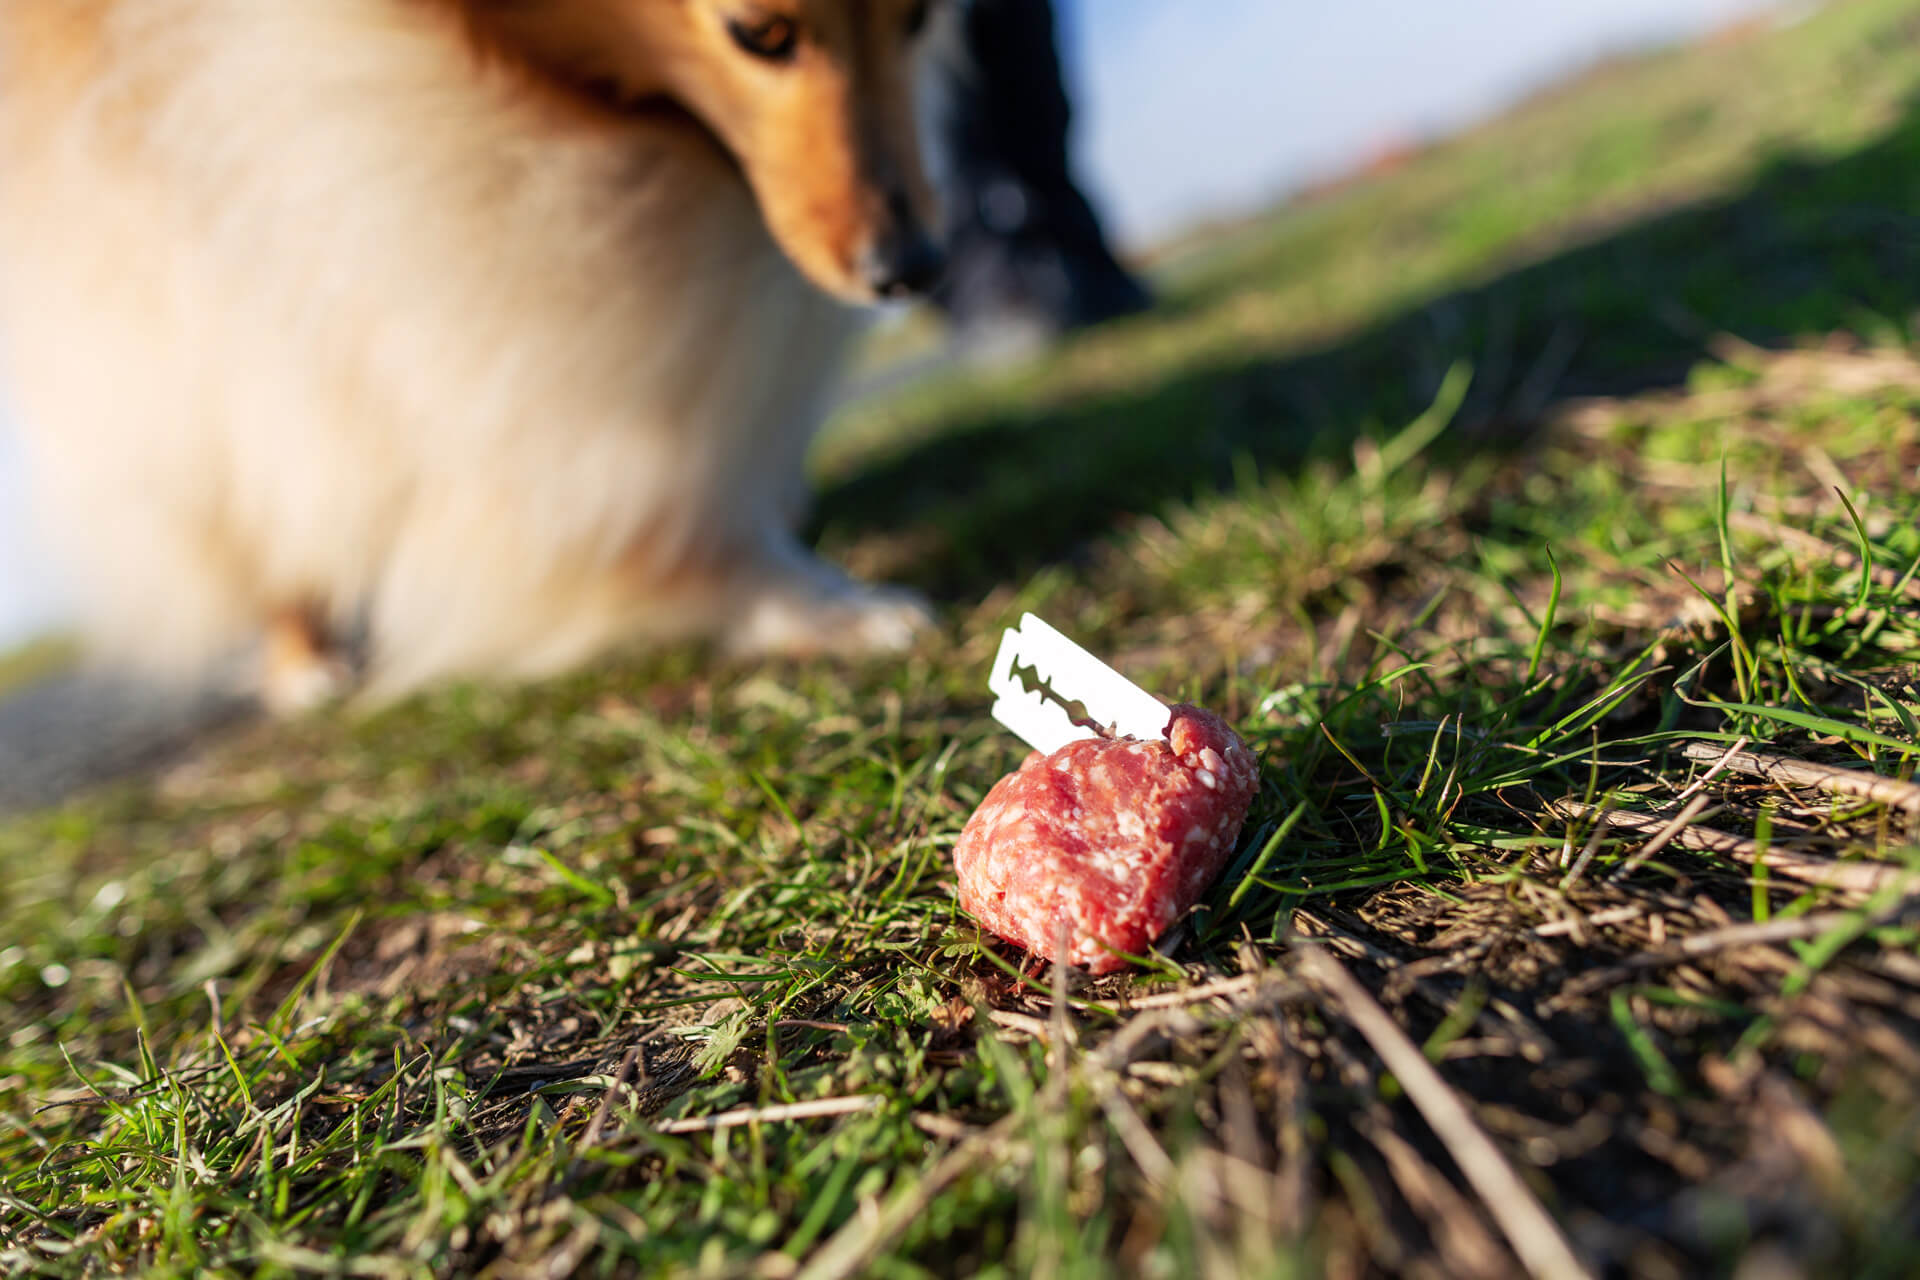 Be aware of canine food contamination
